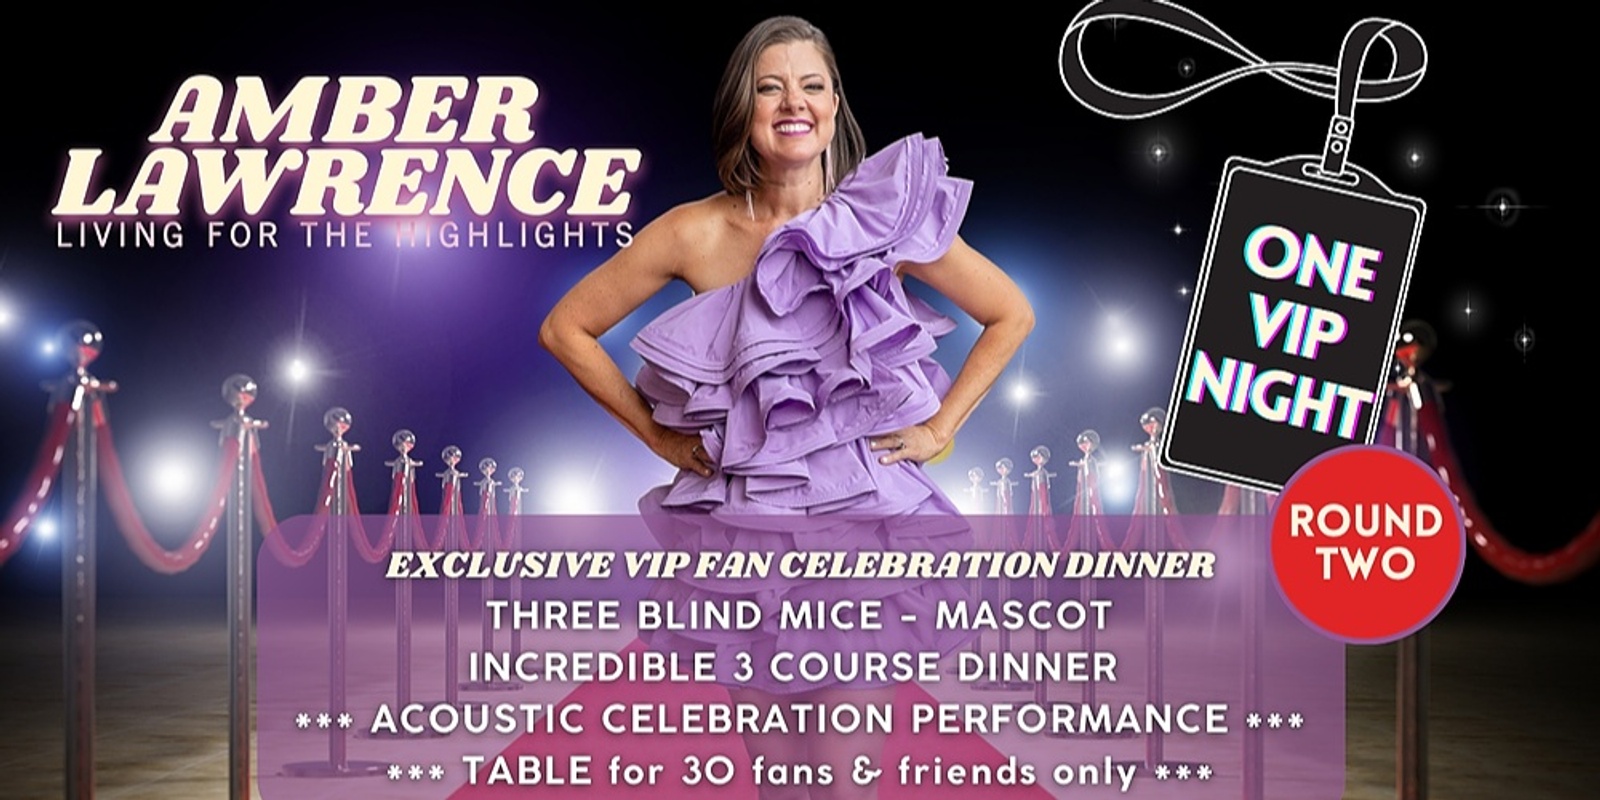 One VIP Night Number 2 - an exclusive event dinner with Amber, celebrating 'Living for the Highlights'